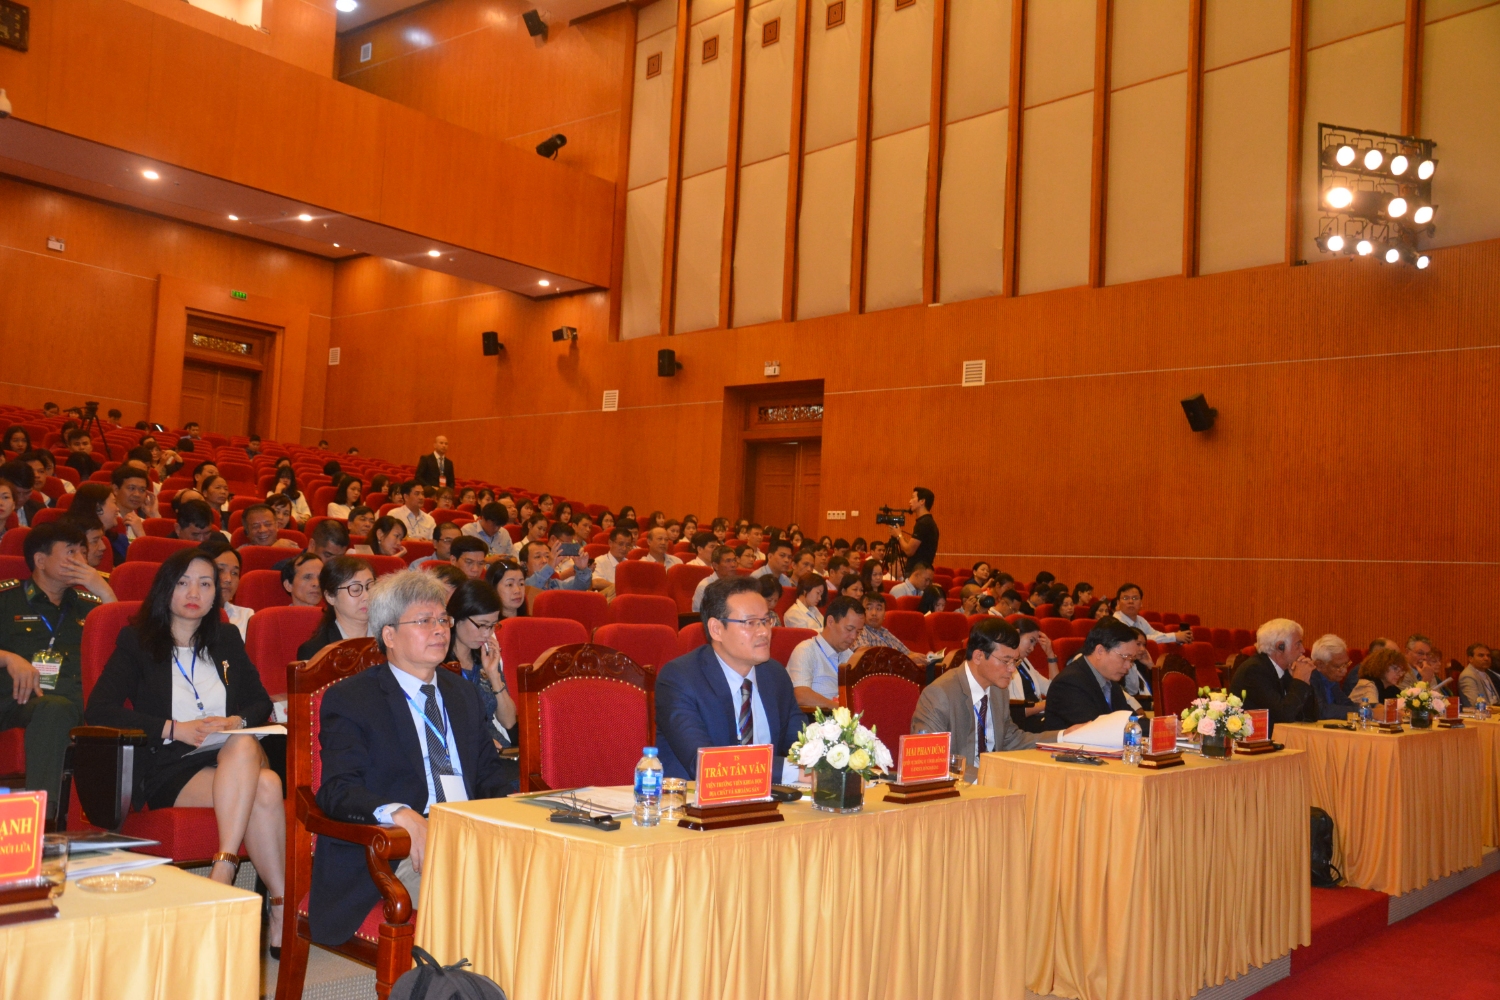 International conference on “sustainable tourism development through geopark model” in Cao Bang province